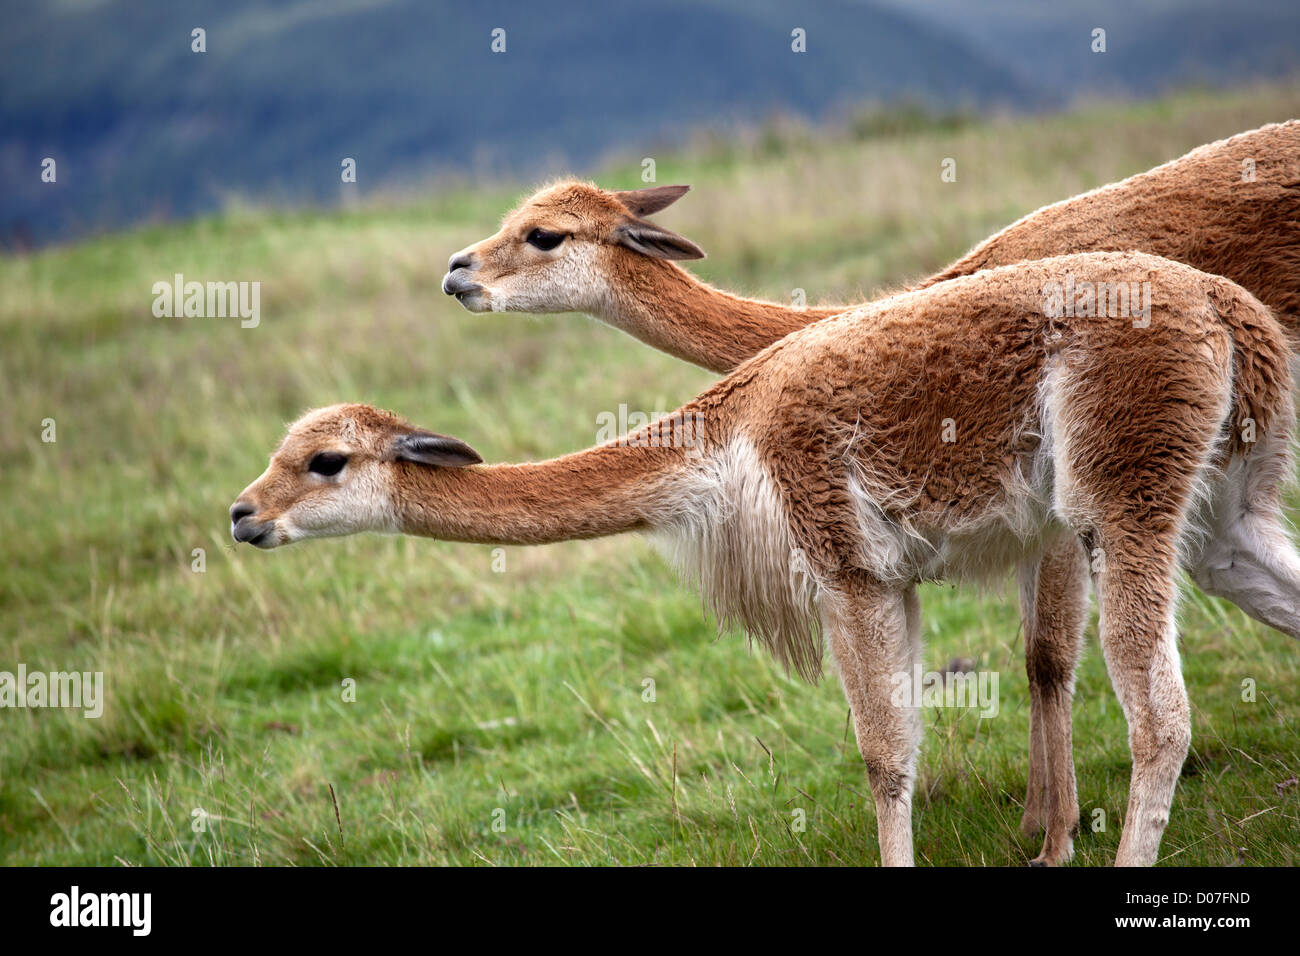 Two vicuña, a type of camelid, grazing outside the Andean city of Cajamarca, Peru at Granja Porcon, a farming cooperative. Stock Photo